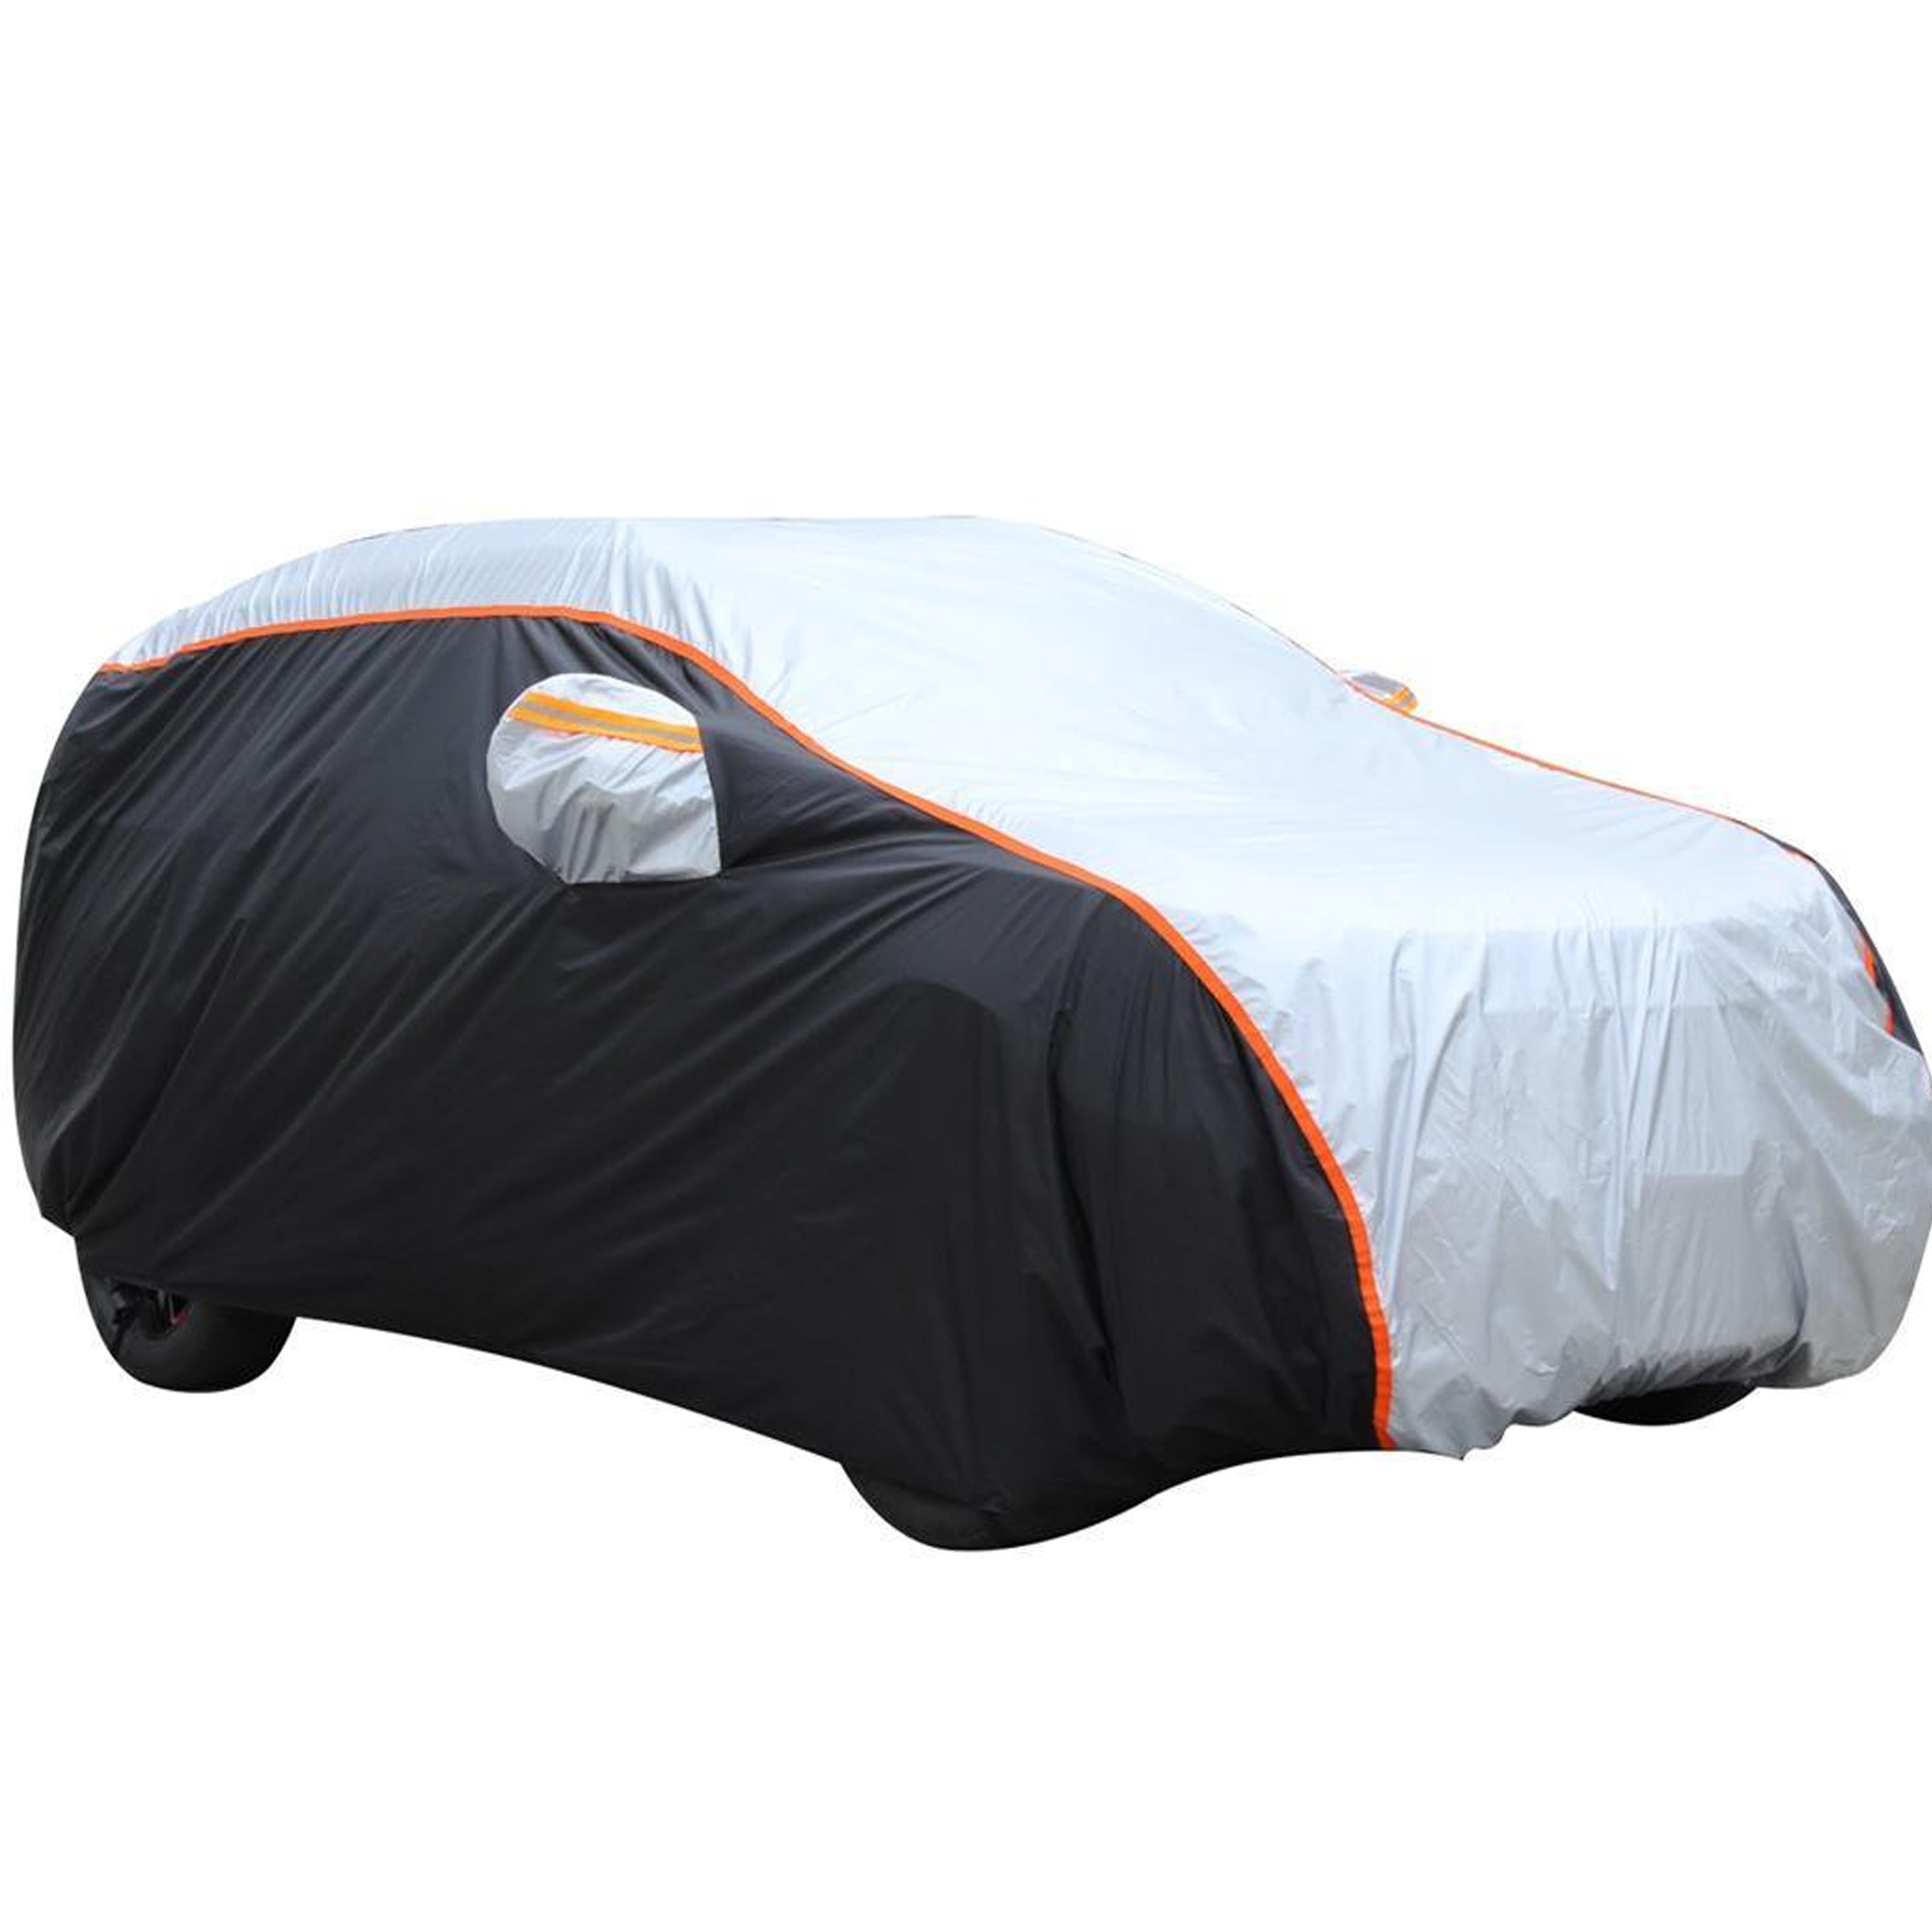 Car Cover Waterproof All Weather Protection Resistant For Audi TT